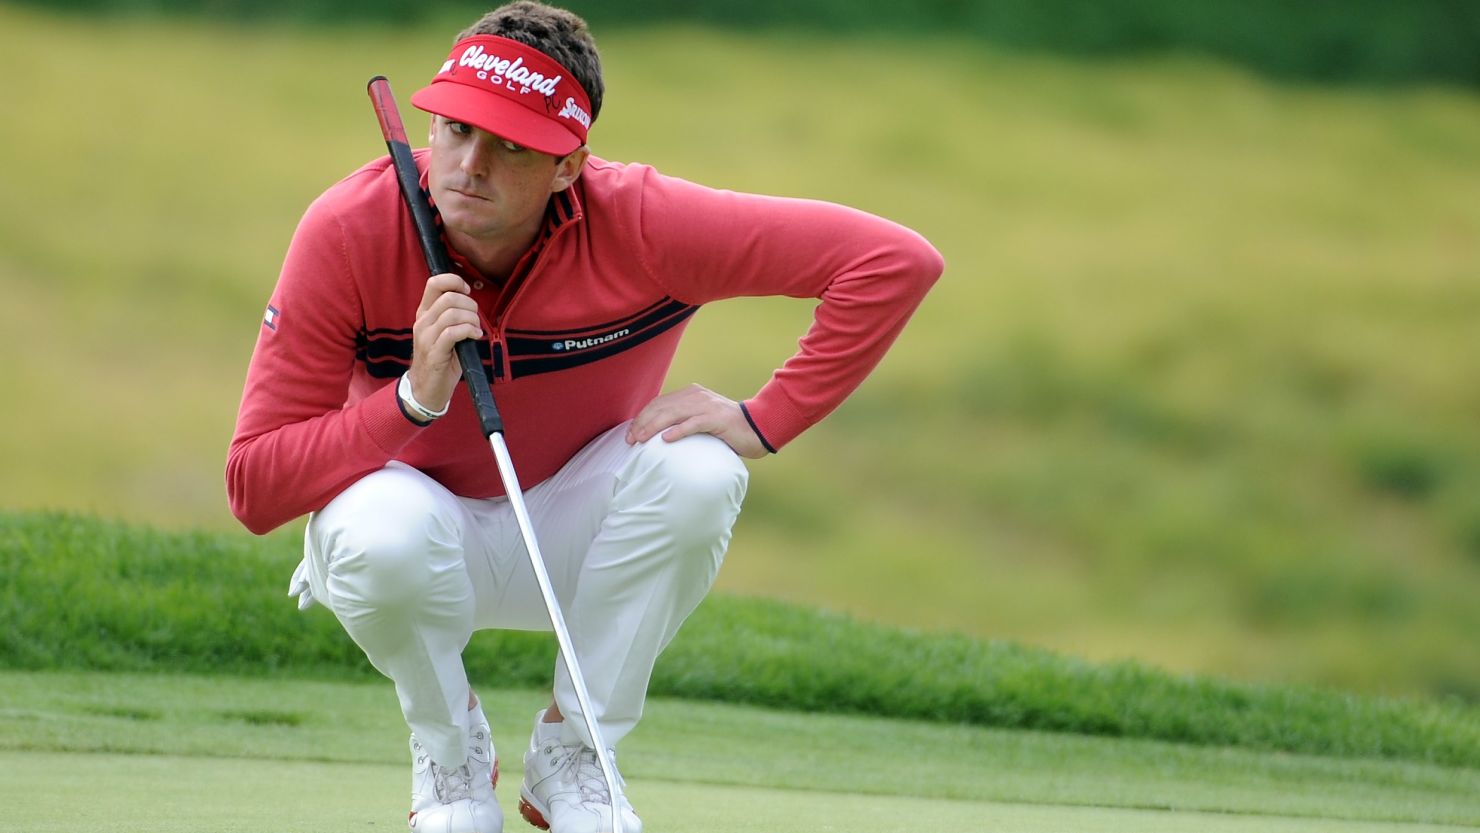 Keegan Bradley's pre-swing spitting has created a social-media storm on Twitter and Facebook.